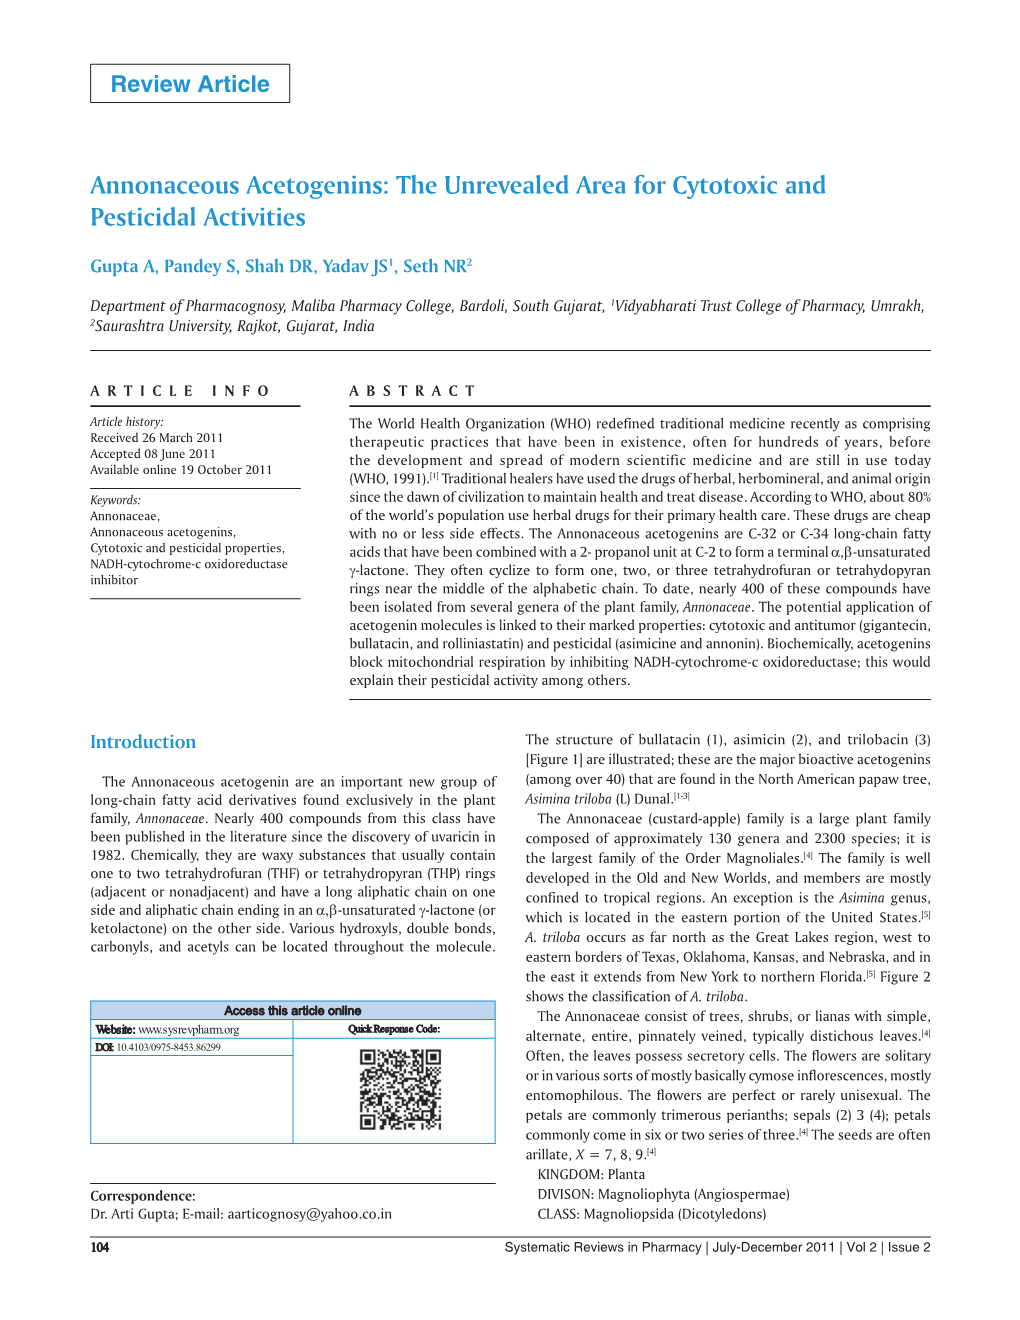 Annonaceous Acetogenins: the Unrevealed Area for Cytotoxic and Pesticidal Activities